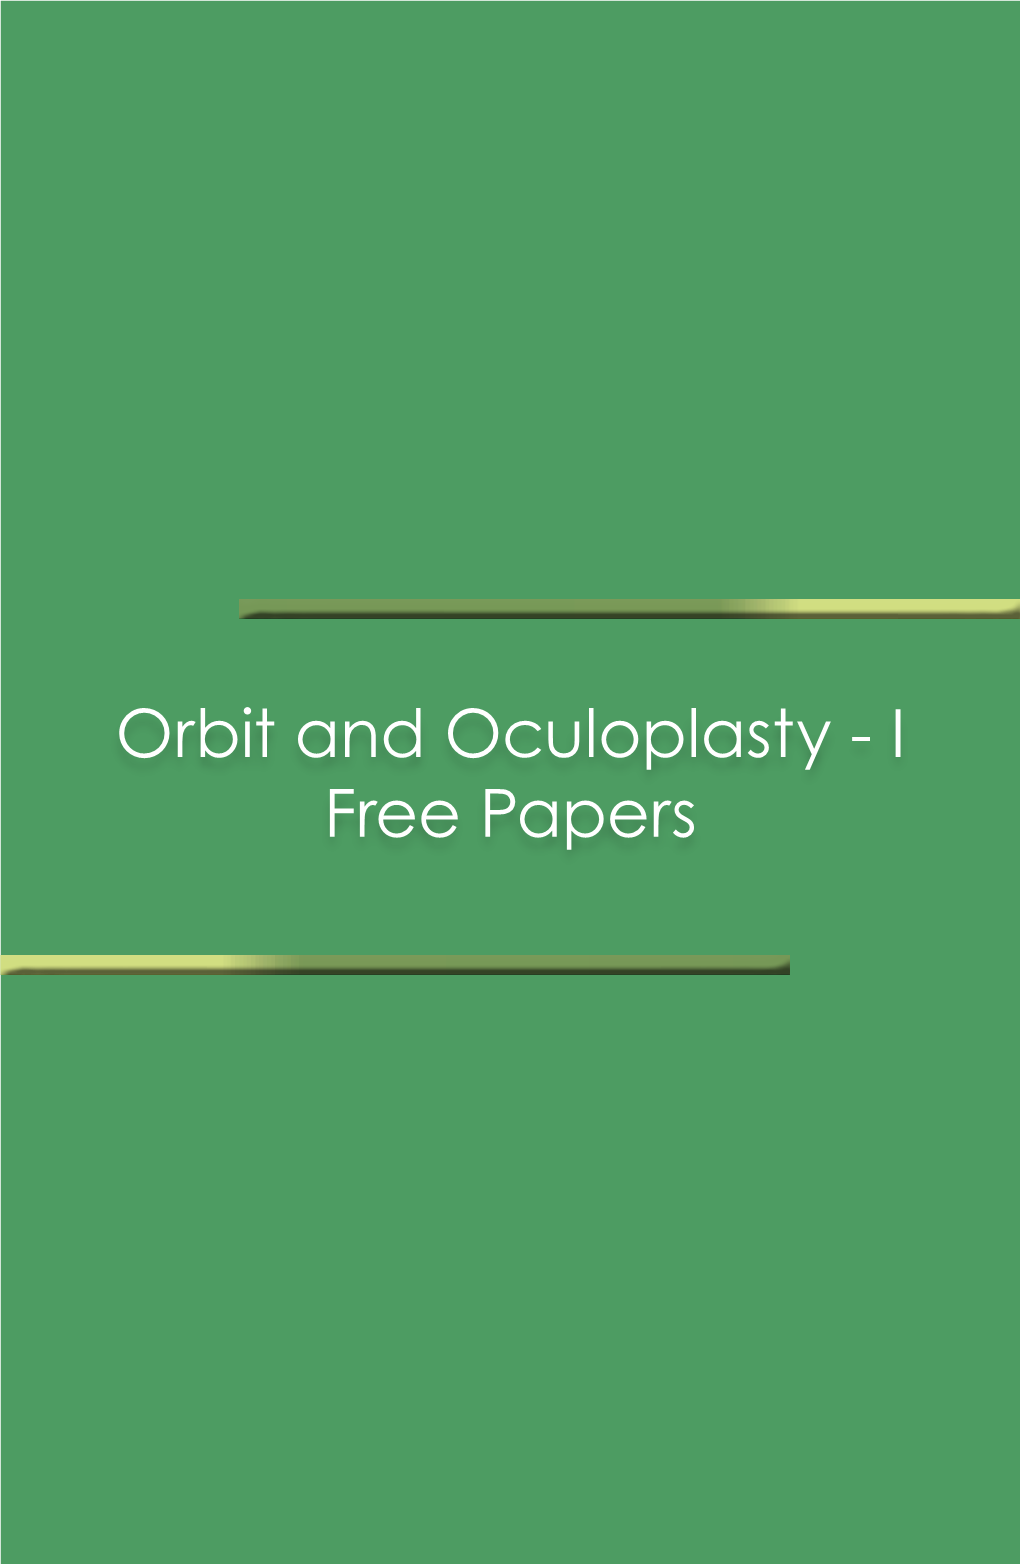 Orbit and Oculoplasty - I Free Papers AIOC in Mobile App